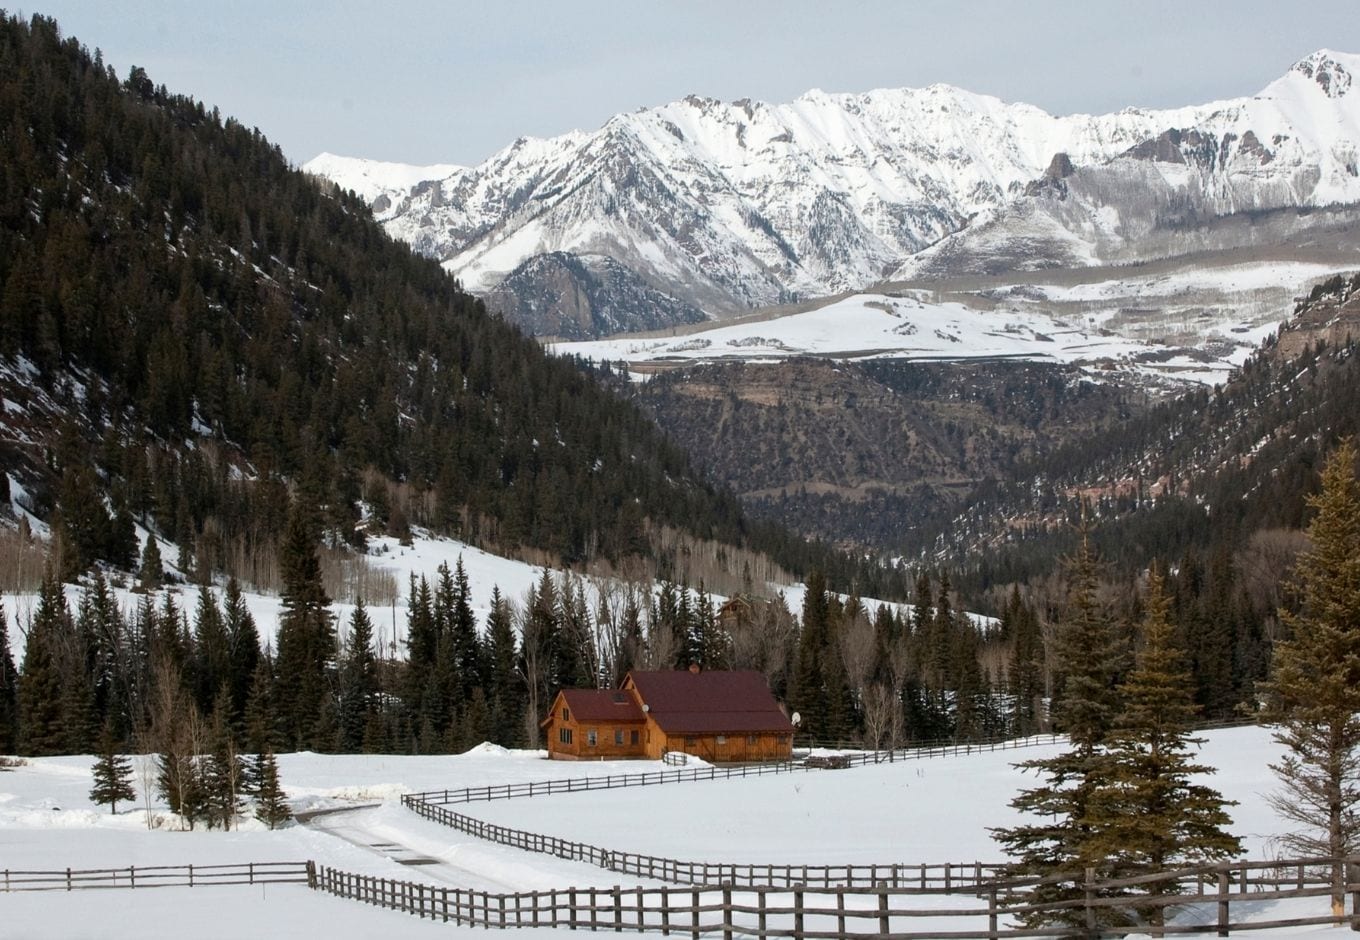 View of the snowy mountains at Telluride, in Colorado.